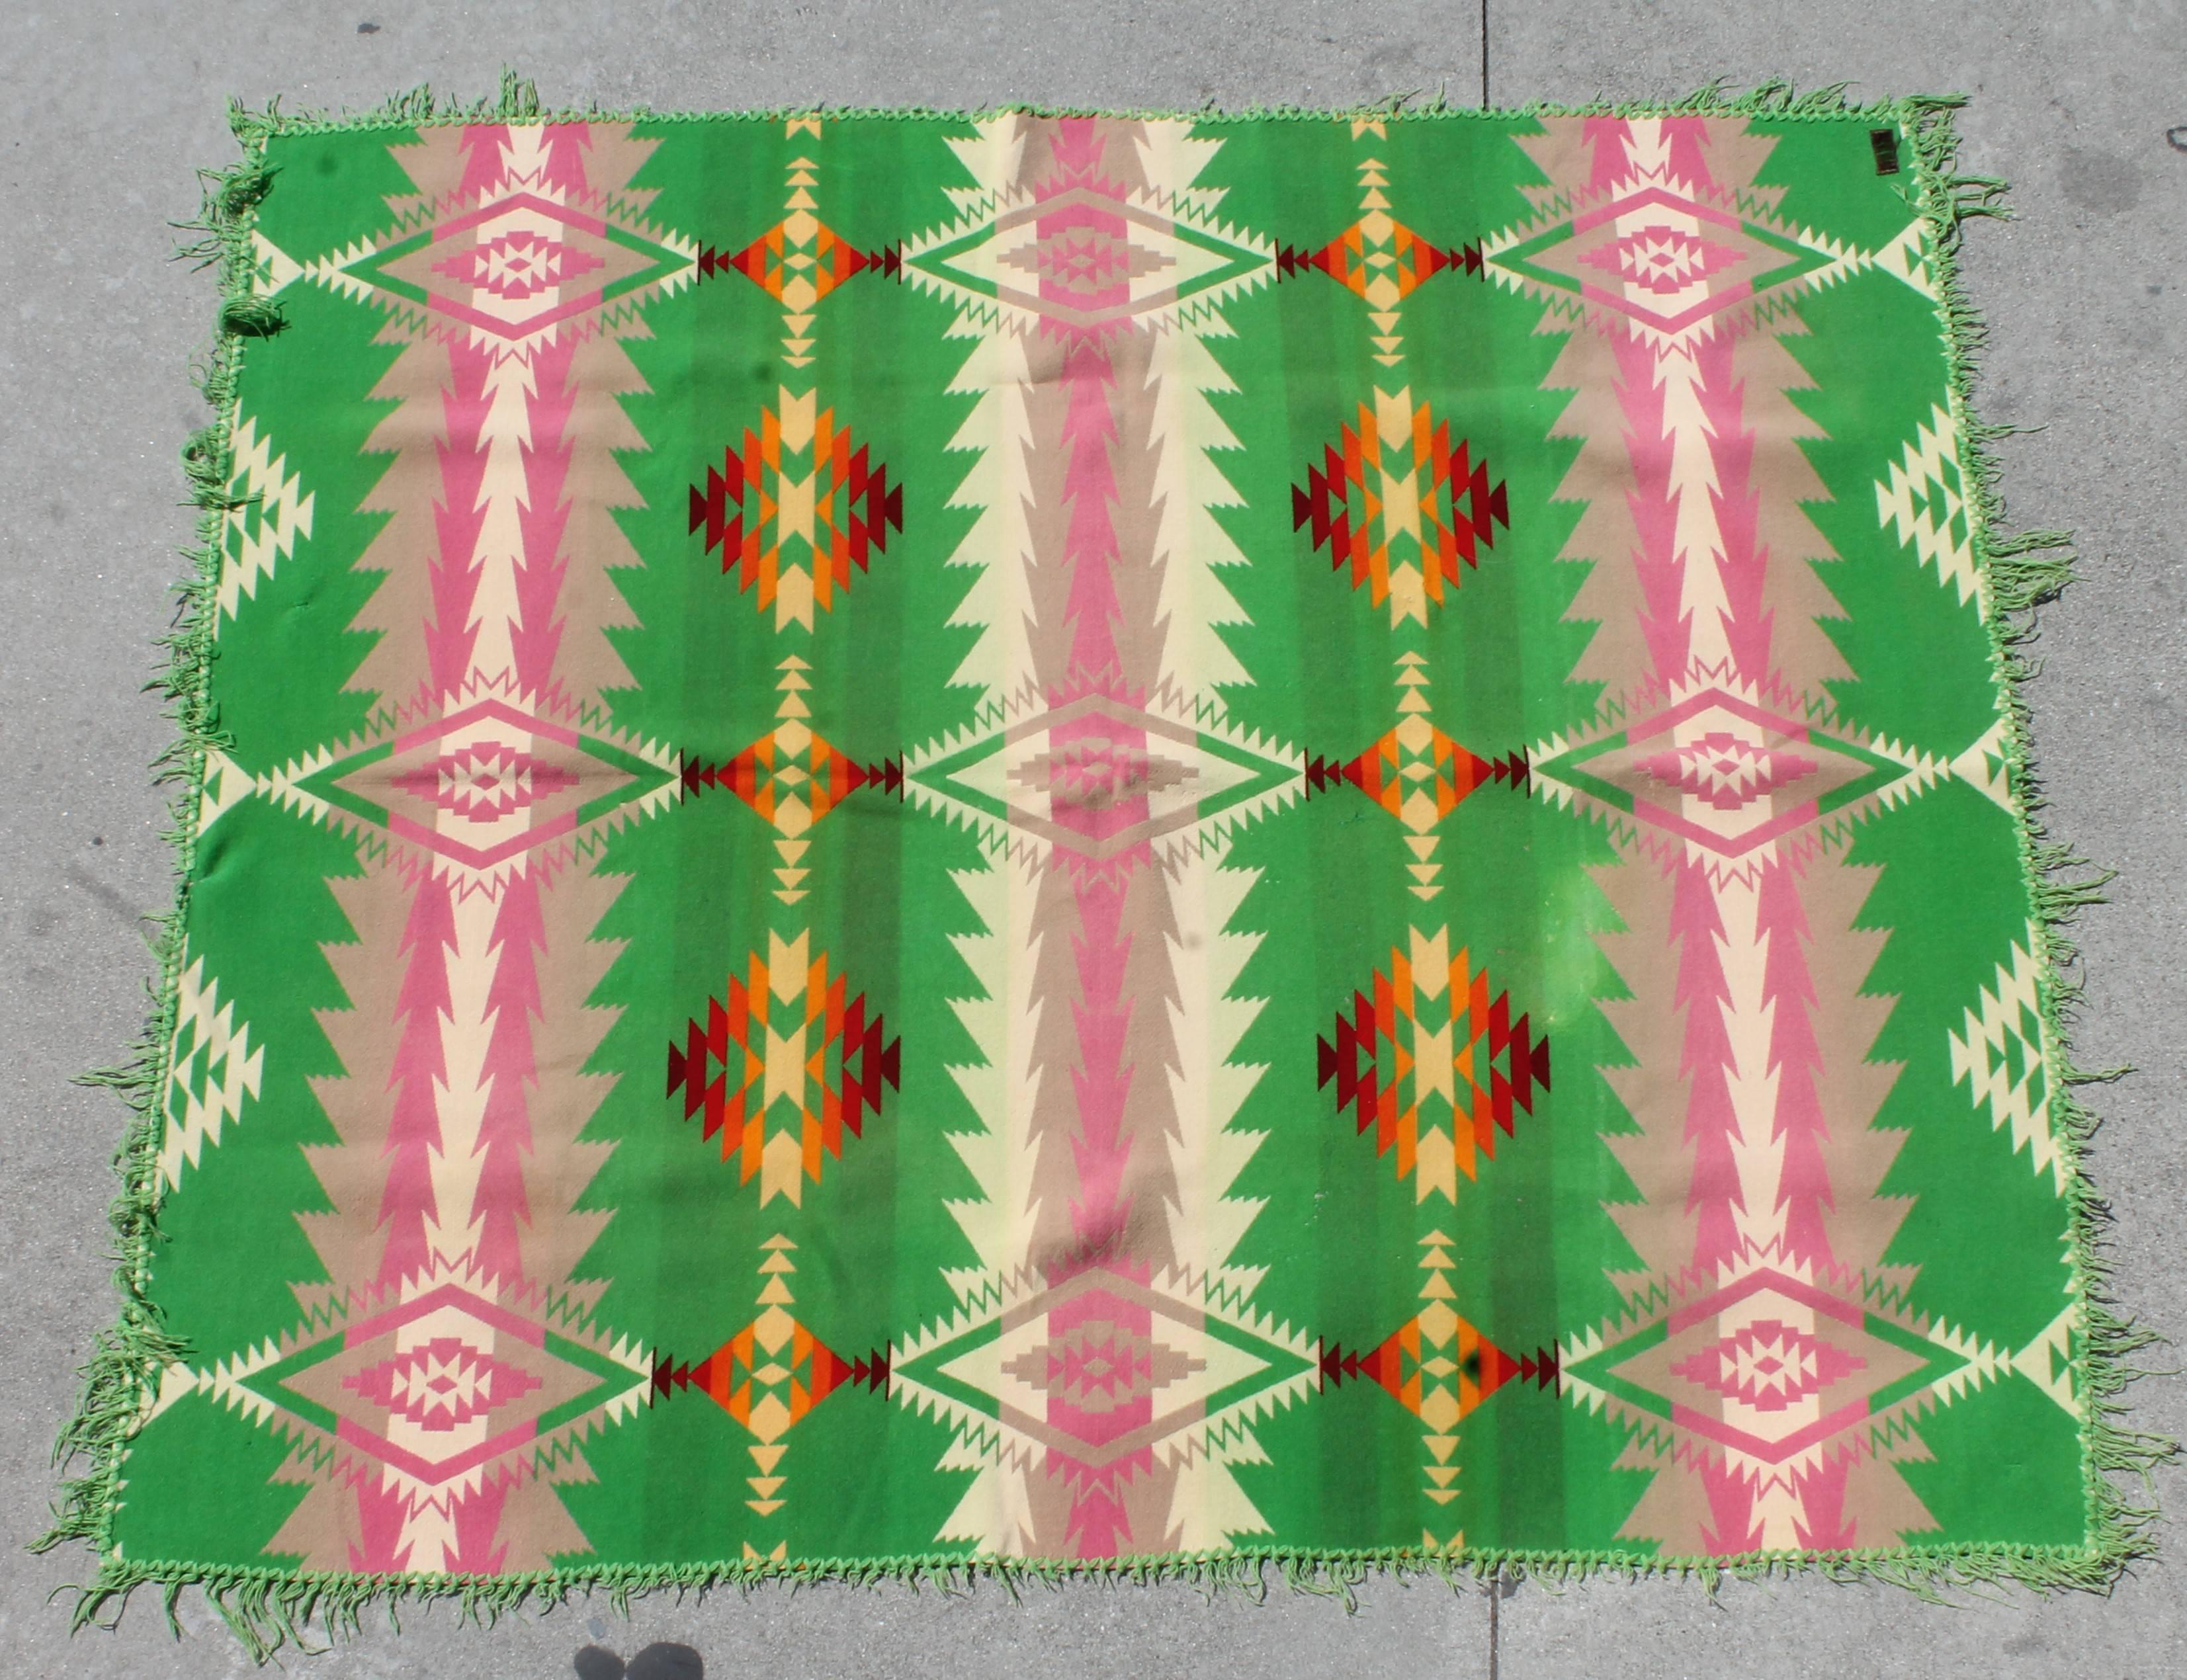 This Cayuse Indian camp blanket is dated 1909 and is in good condition with exception to the loss of fringe. The fringe could be removed easily. The colors are most unusual and vivid. This blanket retains the original worn label.